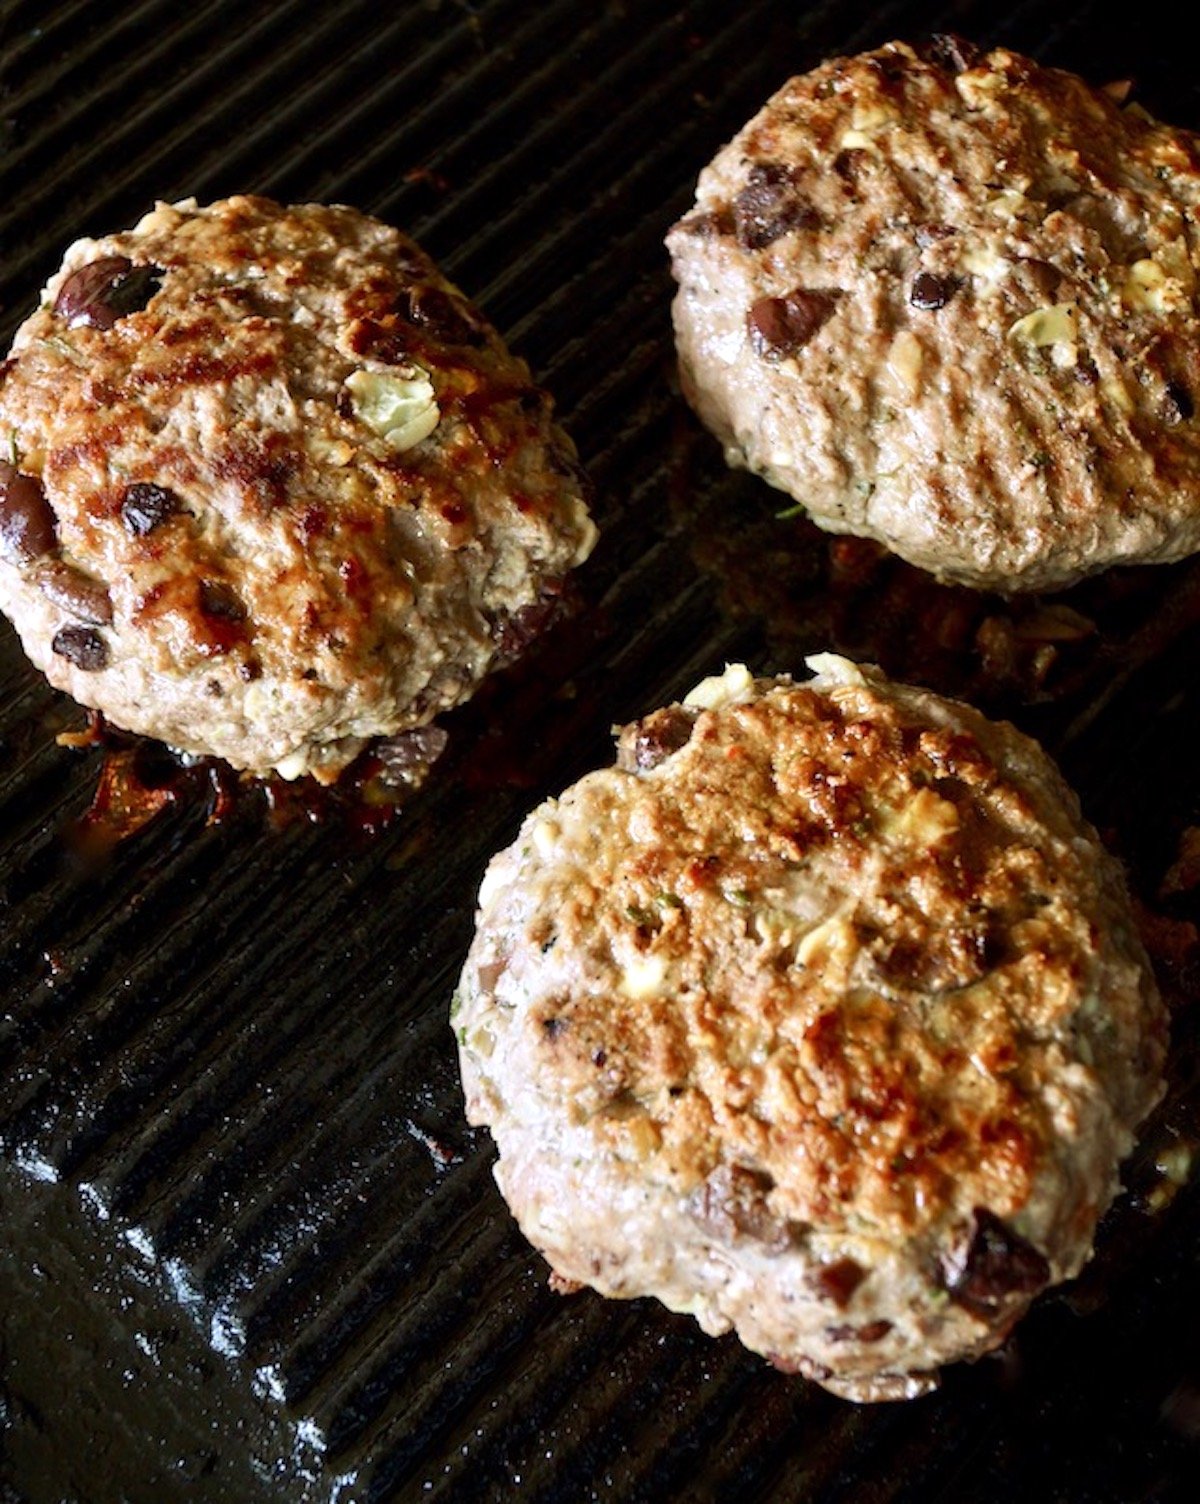 Three Grilled Greek Burgers on the grill.